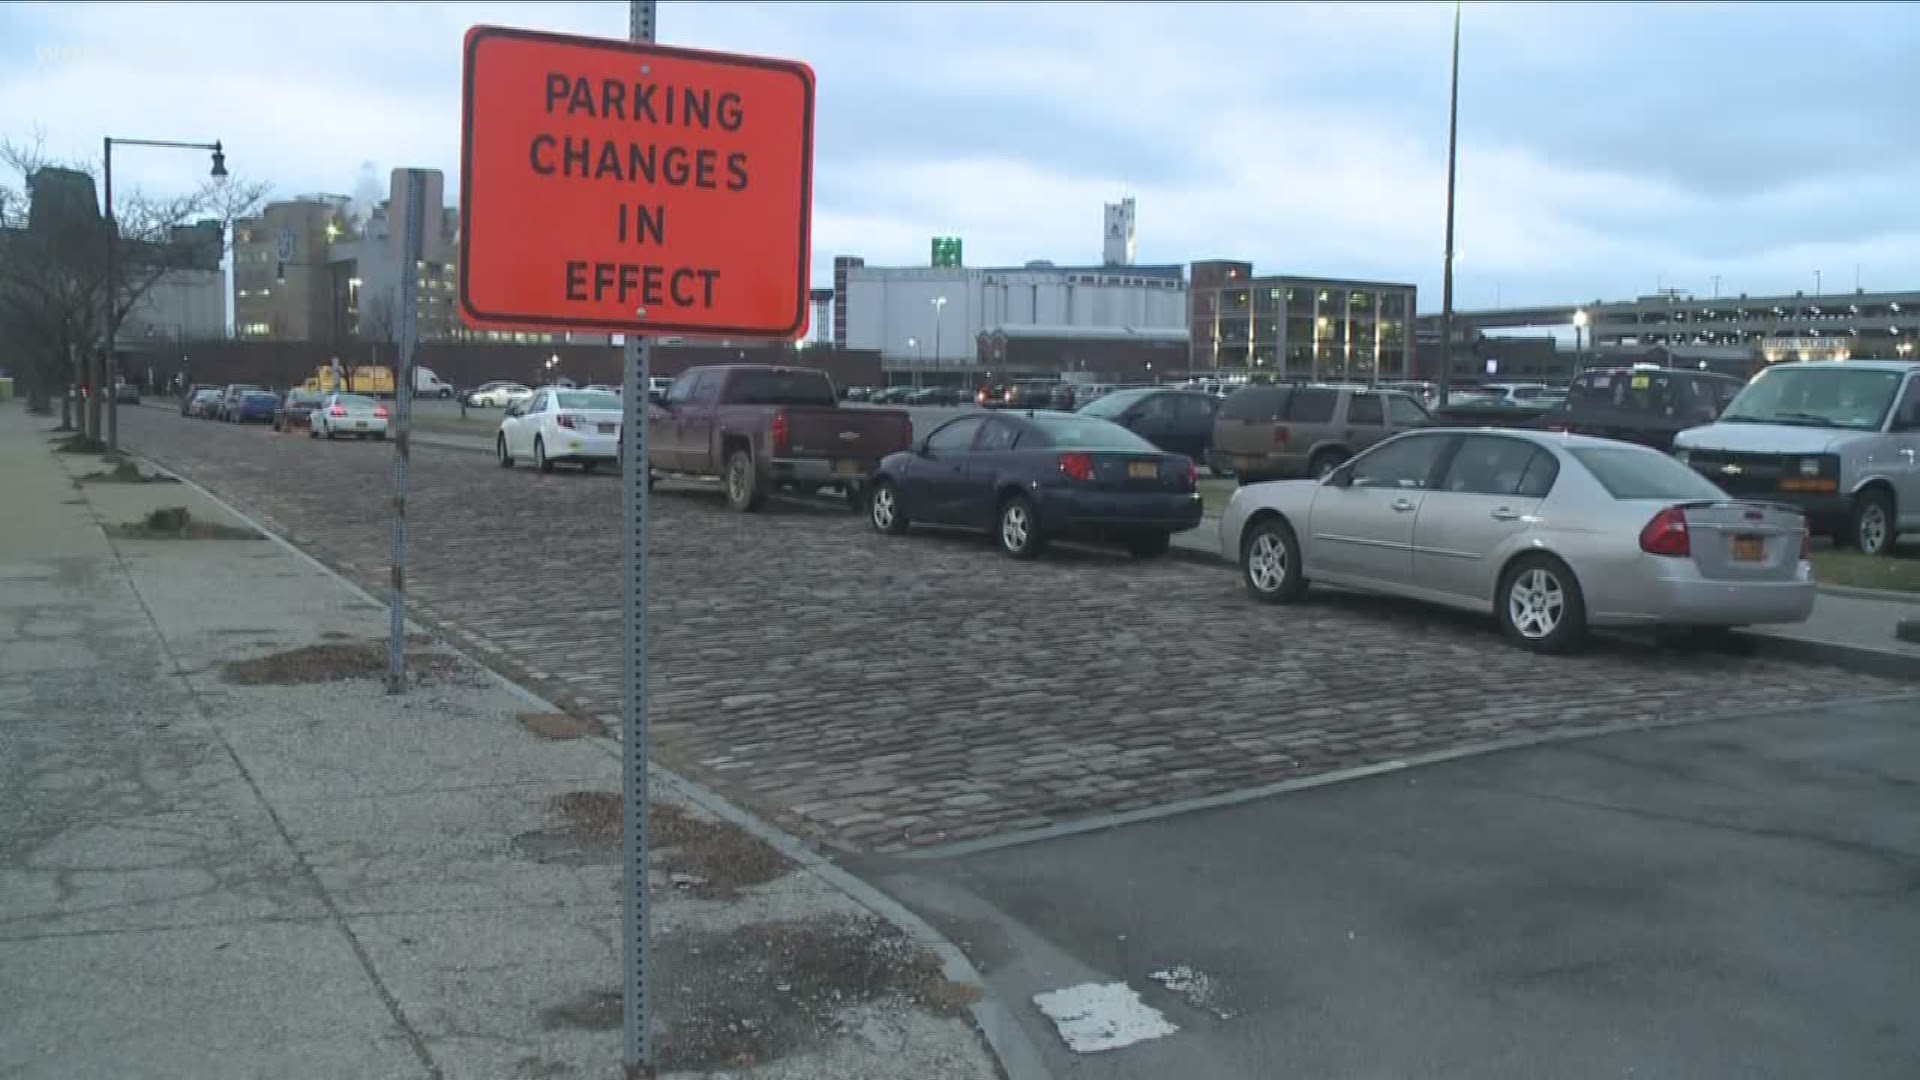 Confusion, Opposition To New Parking Rules